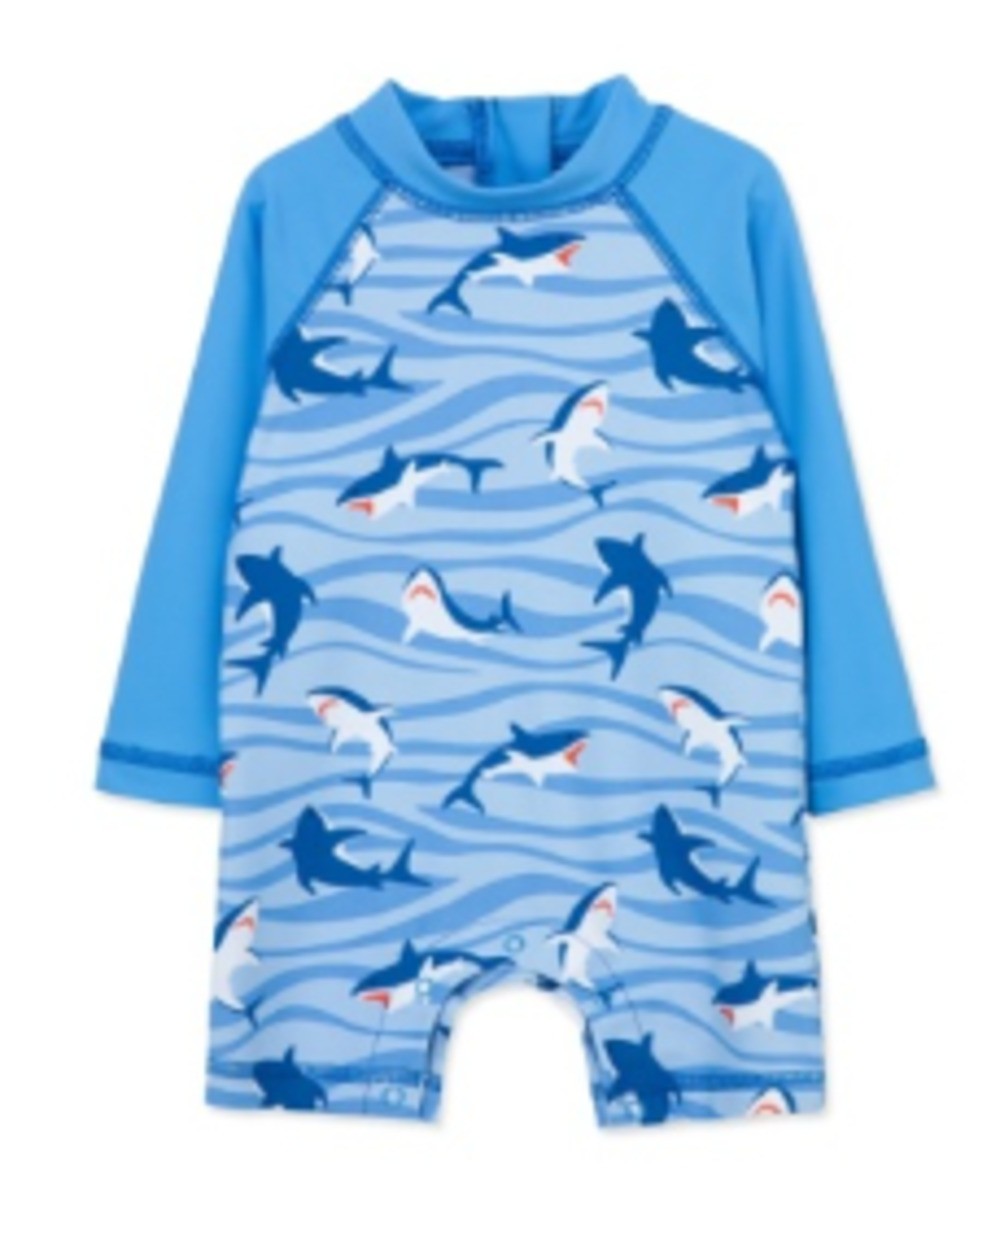 Little Me LWK13969I Clothes for Baby Boys' Shark Long Sleeve Full Coverage Rash Guard Suit, Blue